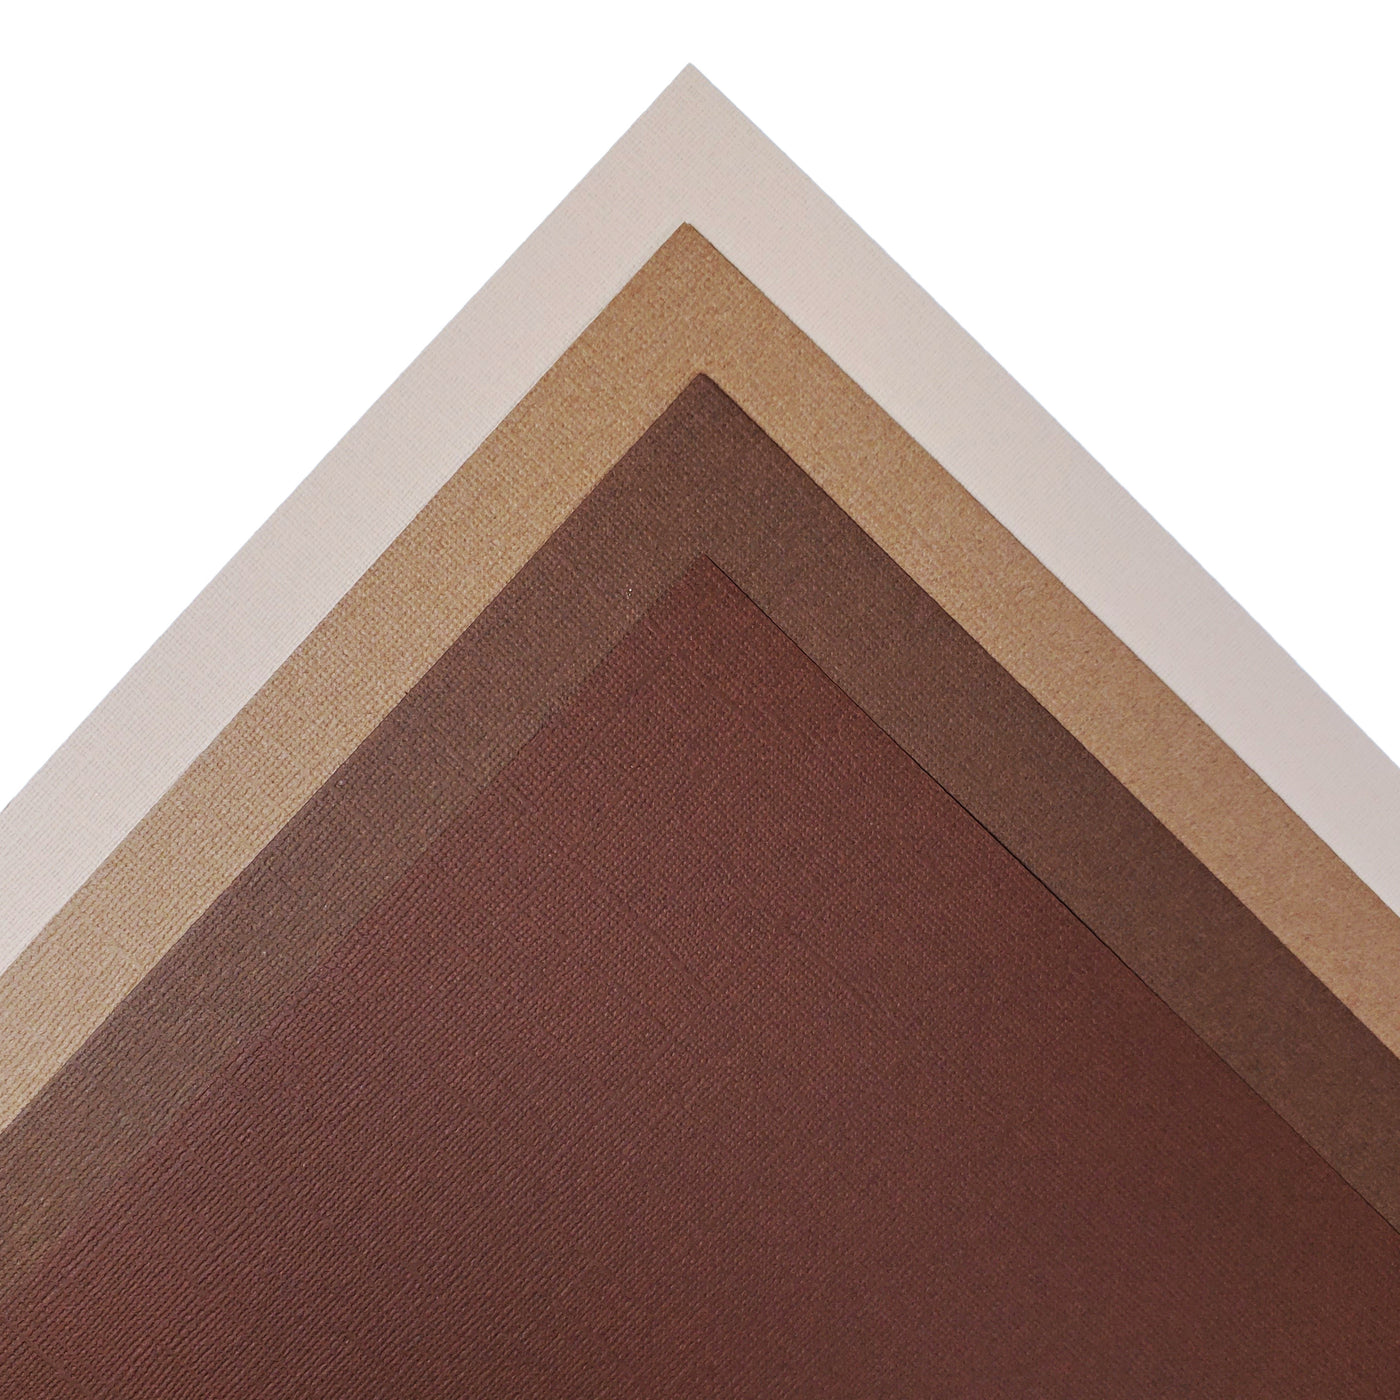 The Brown monochromatic assortment includes three (3) each of four (4) shades of brown colors of Bazzill textured cardstock.